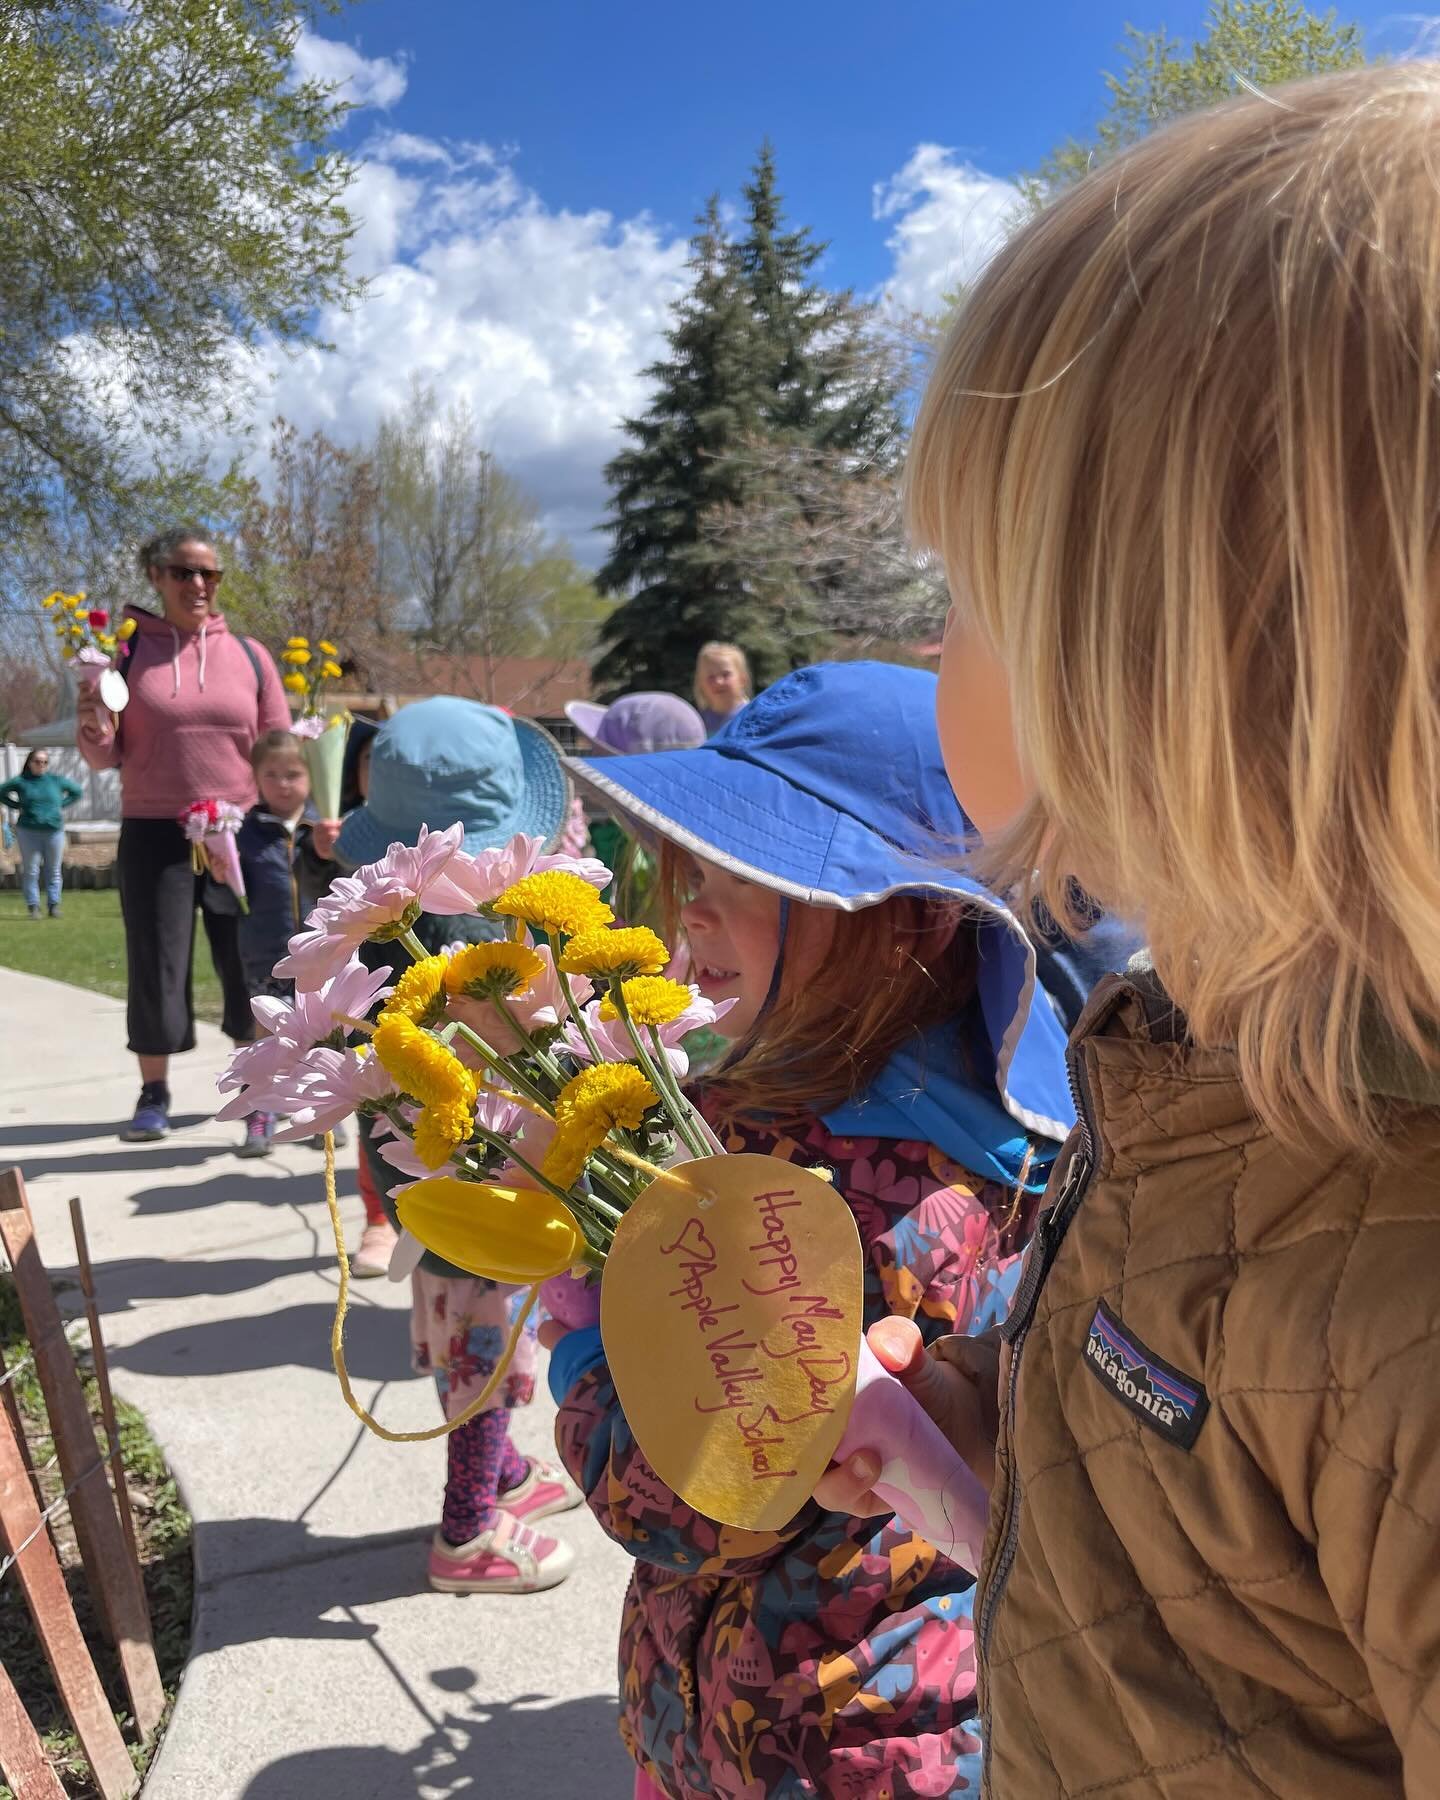 It&rsquo;s May 1st! We delivered bundles of flowers to our mailman, our librarian, our public health nurses and our neighbors. Wishing everyone a happy happy May Day! 🌷🌻🪻